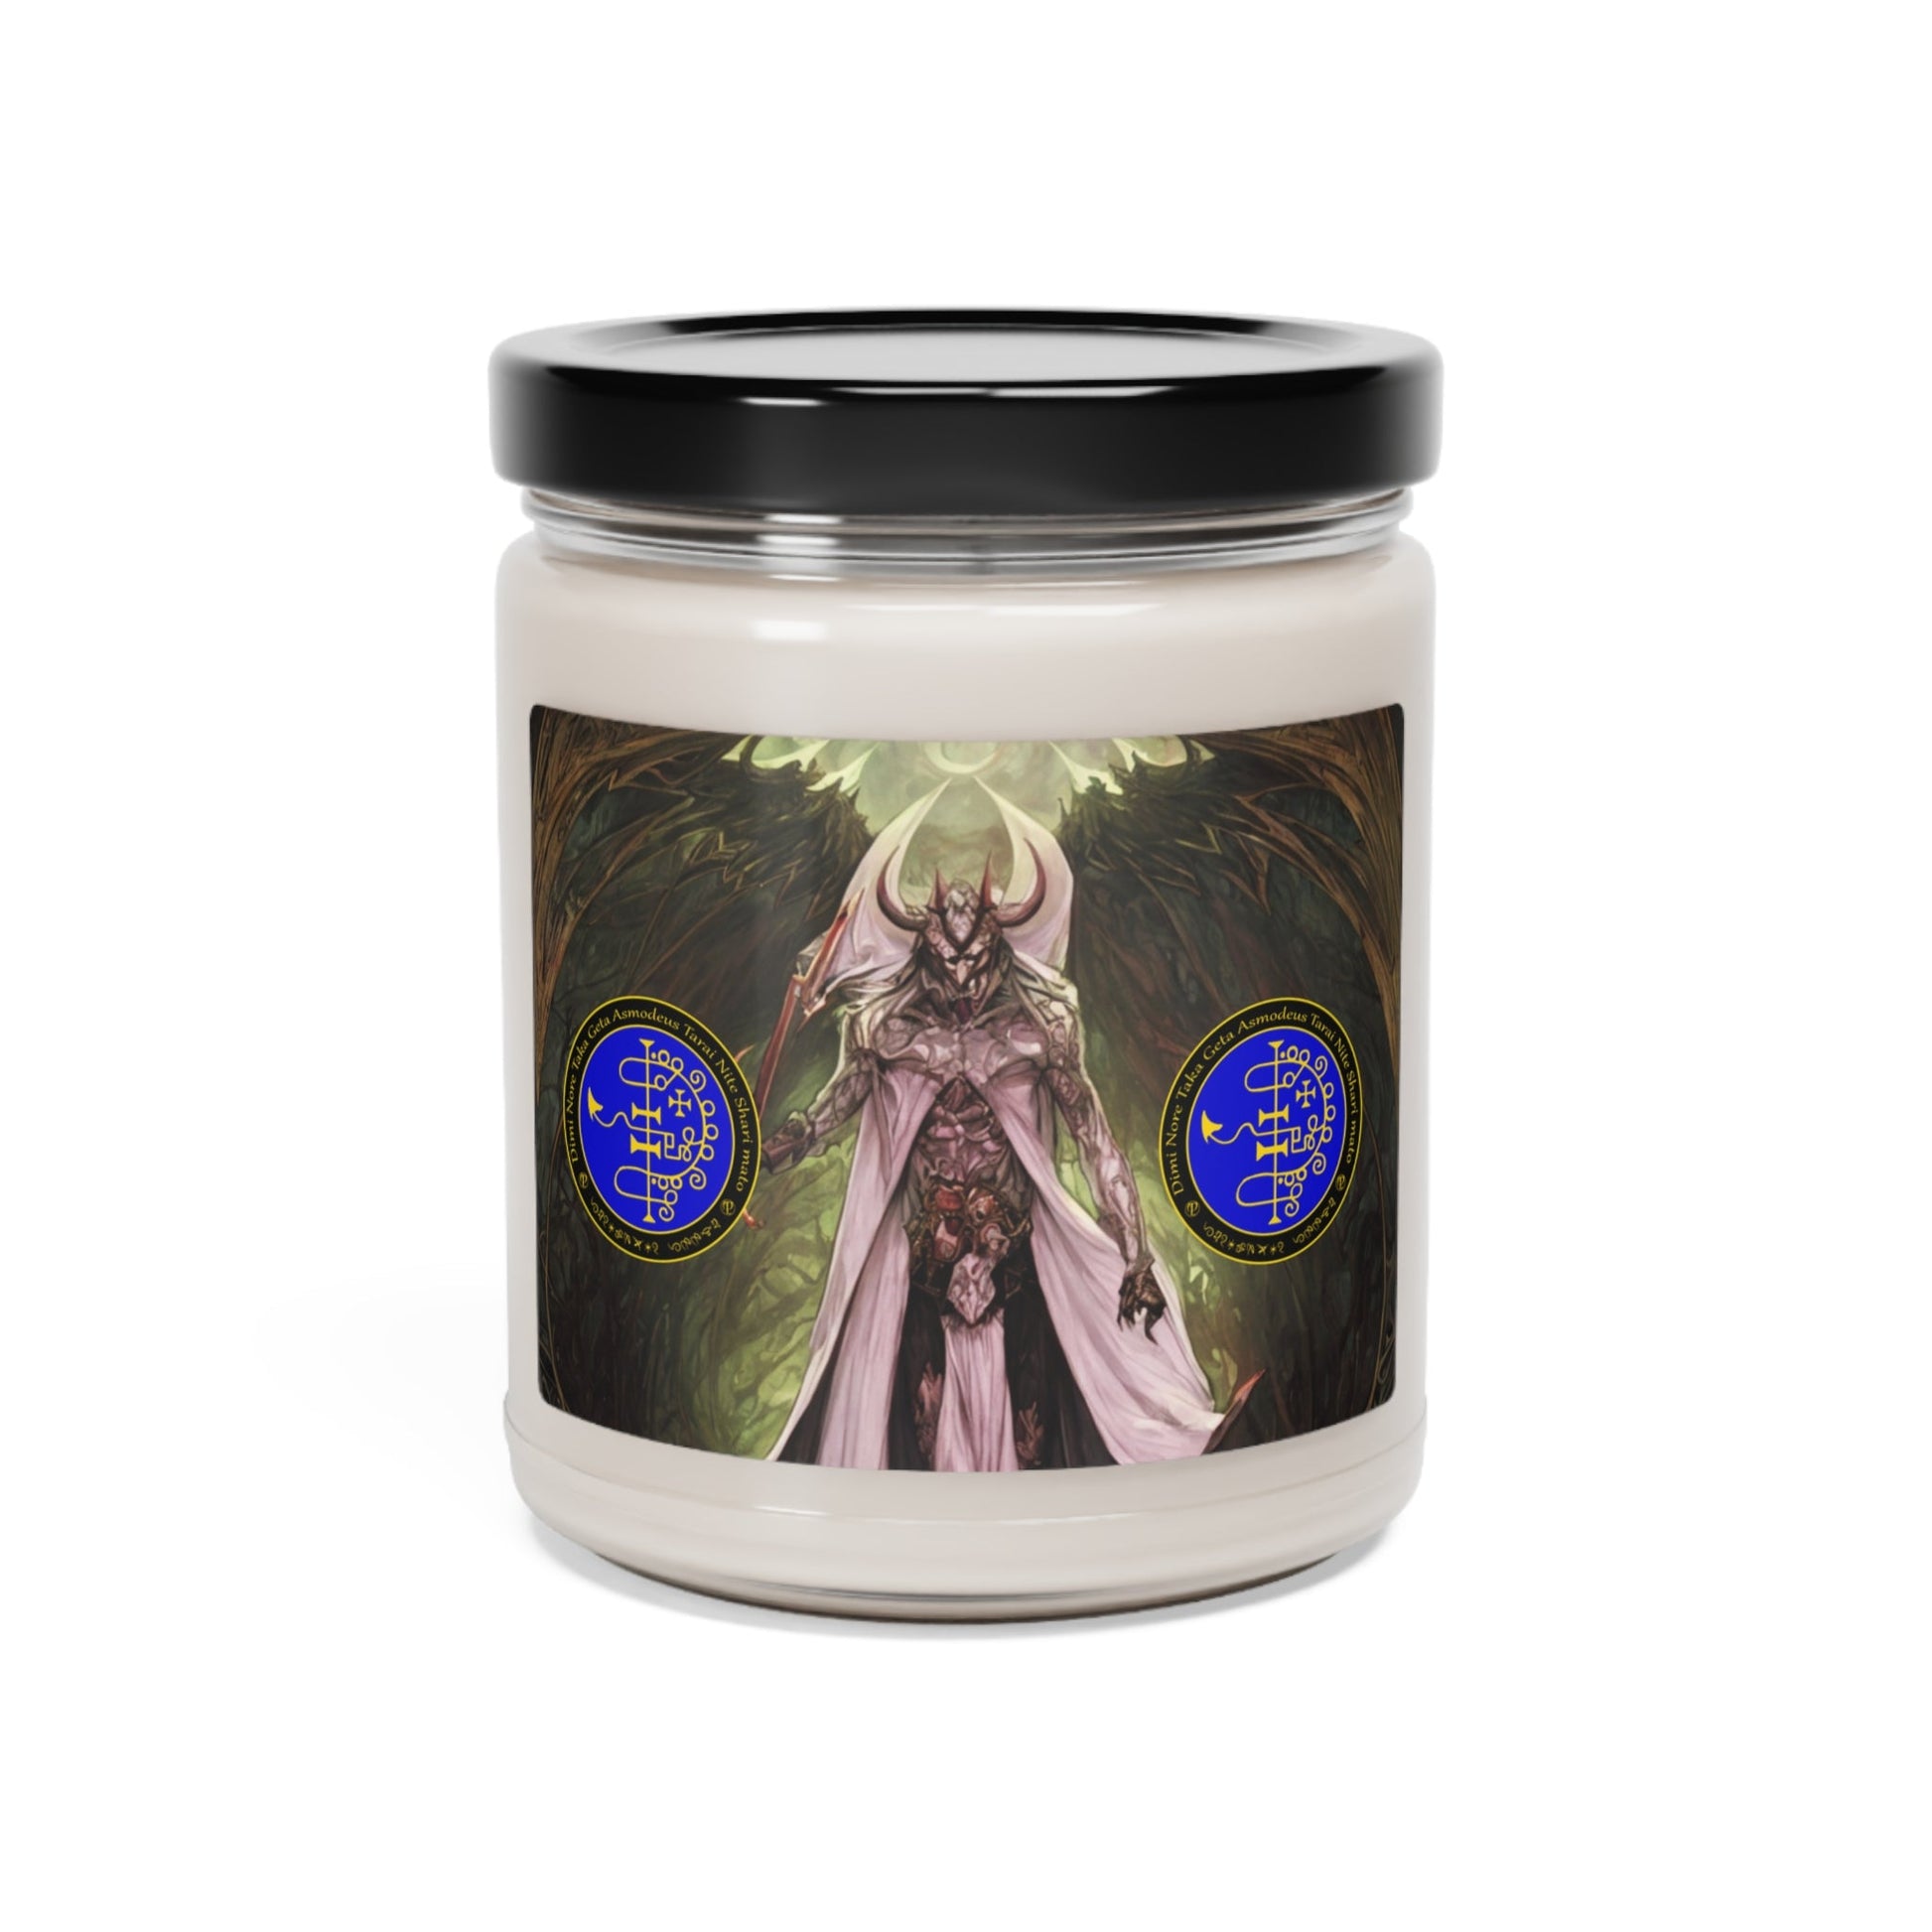 Demon-Asmodeus-Altar-Scented-Soy-Candle-for-Gambling-related-offerings-rituals-initiations-or-praying-and-meditation-6